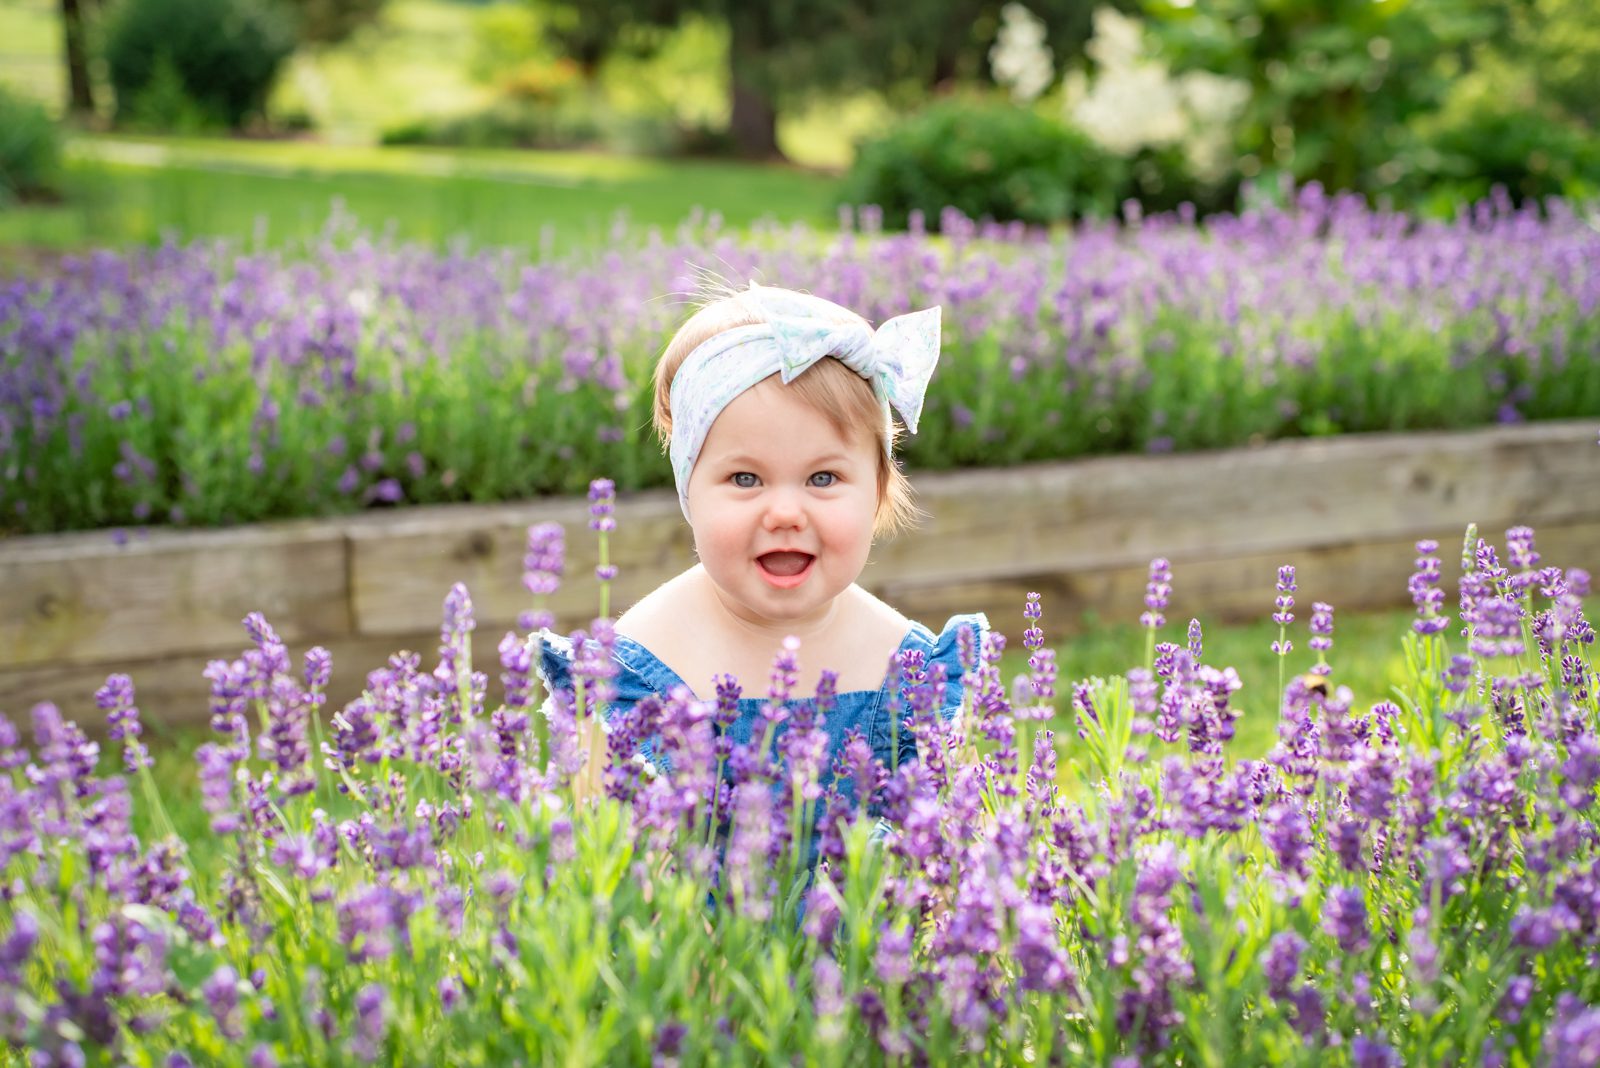 a young girl standing behind a row of purple lavender flowers in bloom and looking directly at the camera during a spring photos session